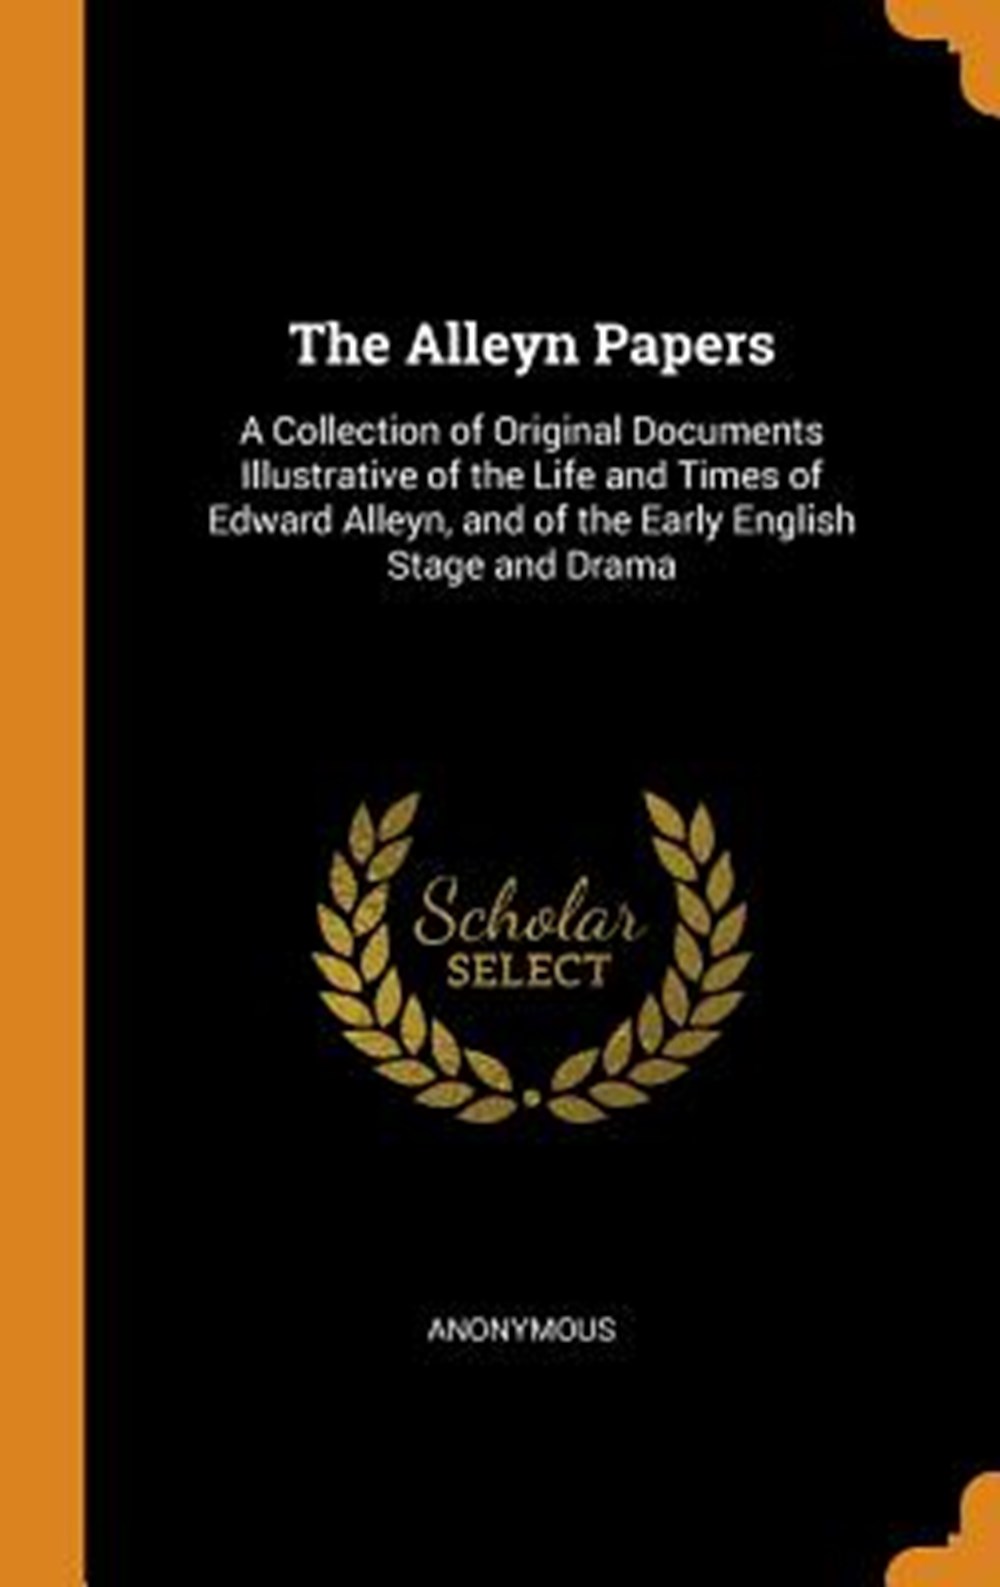 Alleyn Papers A Collection of Original Documents Illustrative of the Life and Times of Edward Alleyn